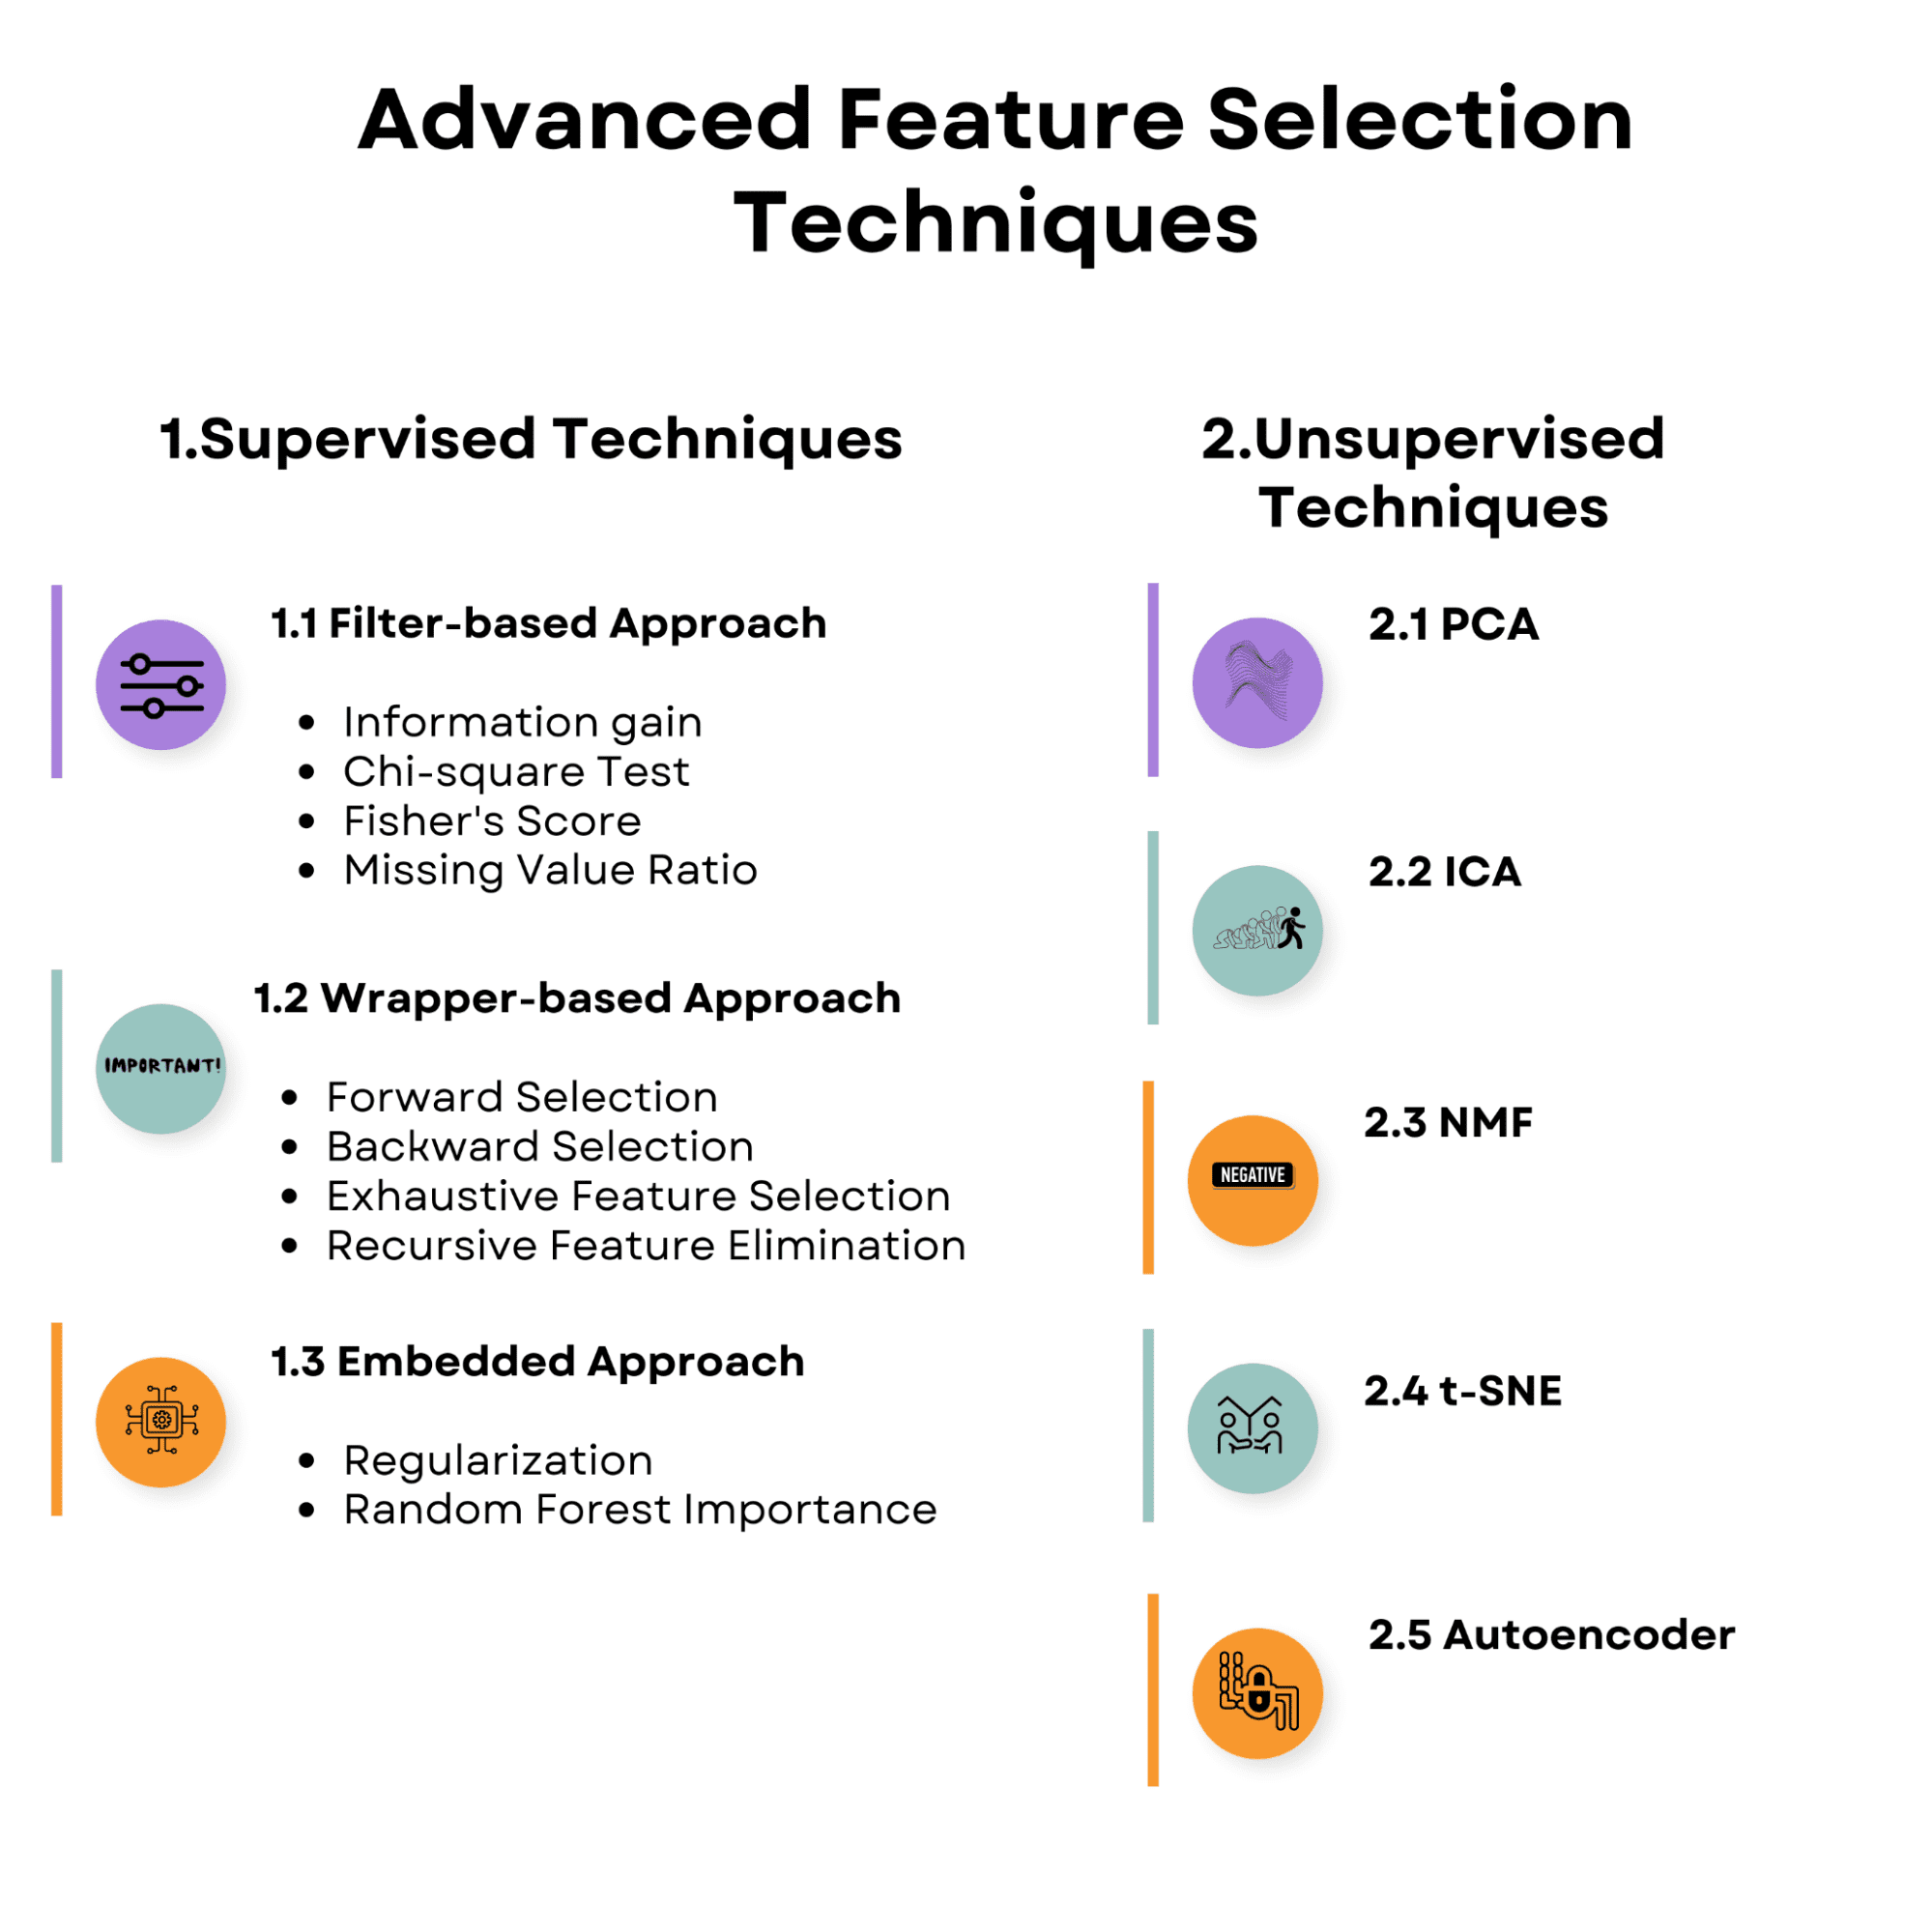 Advanced Feature Selection Techniques for Machine Learning Models